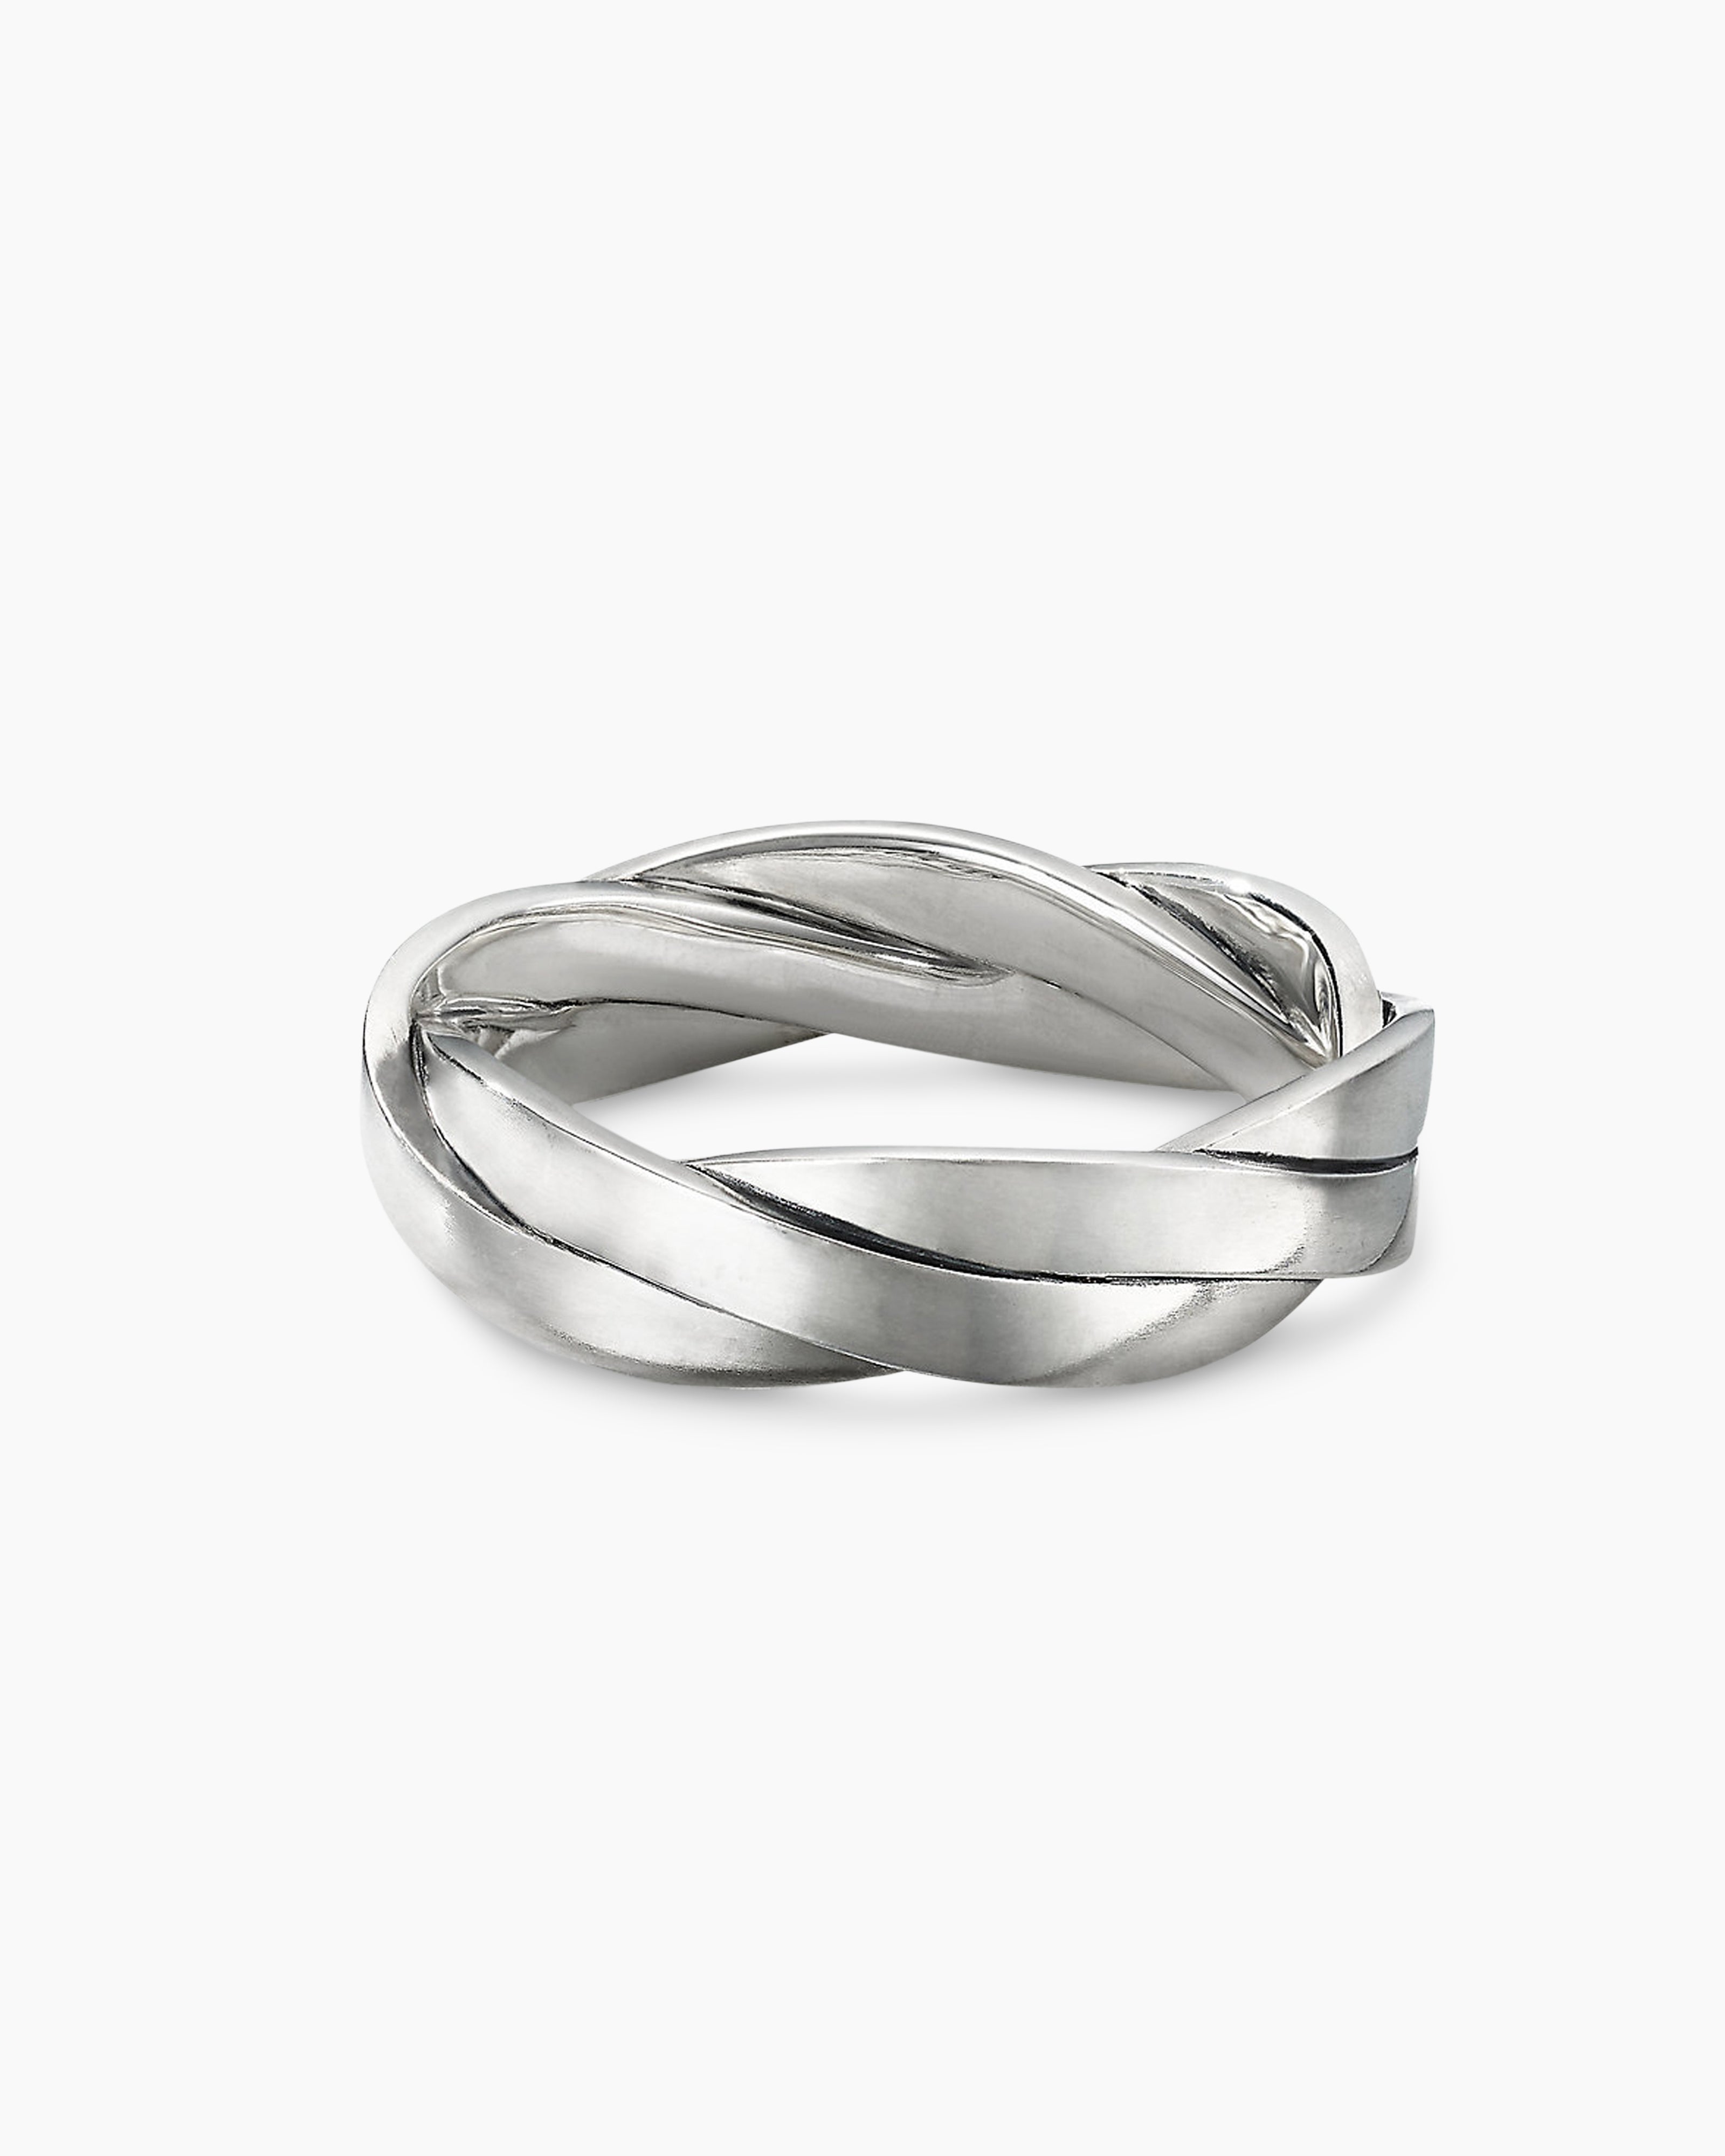 Sell David Yurman Jewelry For The Best Prices | myGemma